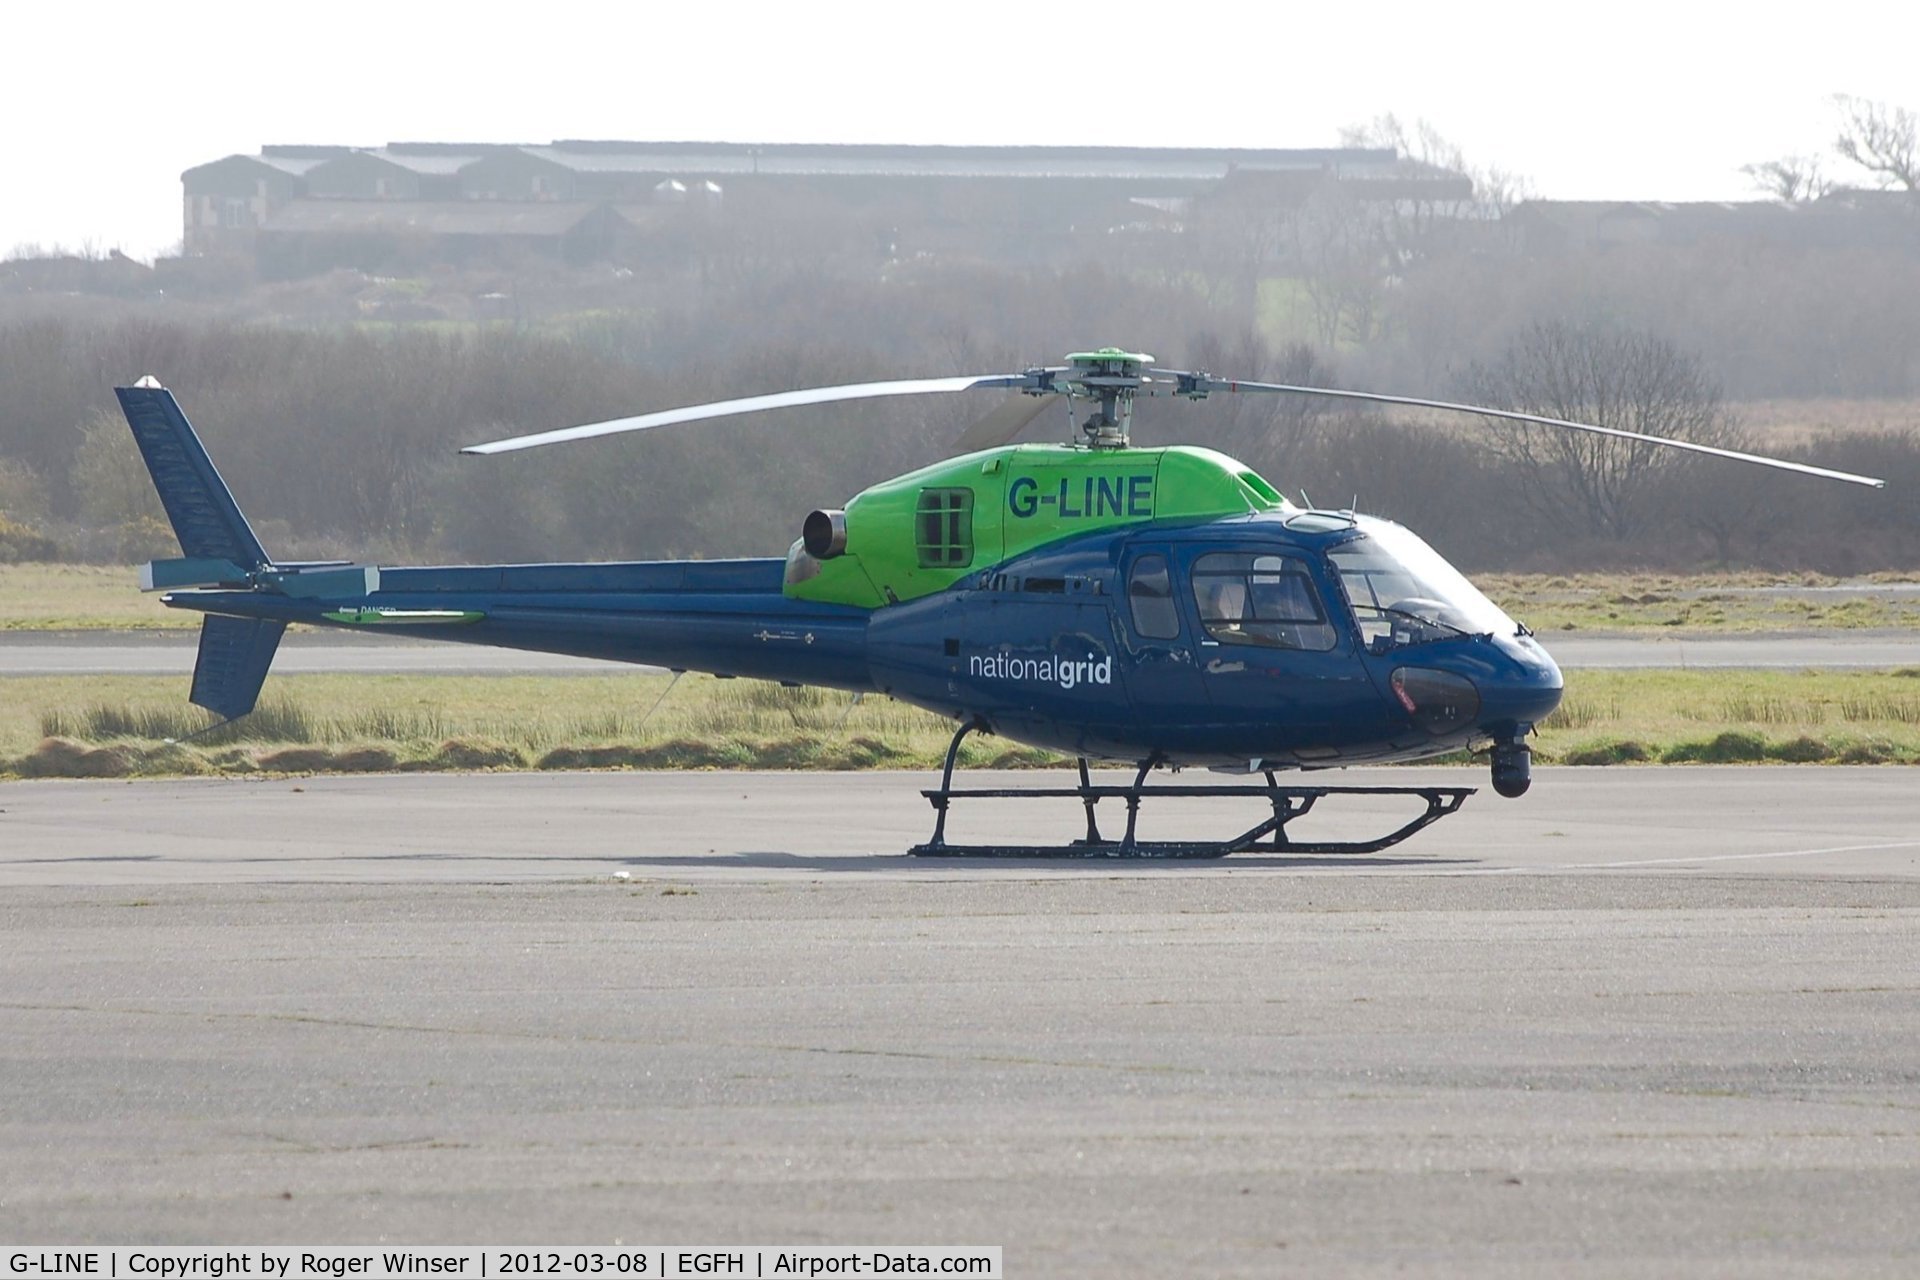 G-LINE, 1994 Eurocopter AS-355N Ecureuil 2 C/N 5566, Operated by the National Grid.